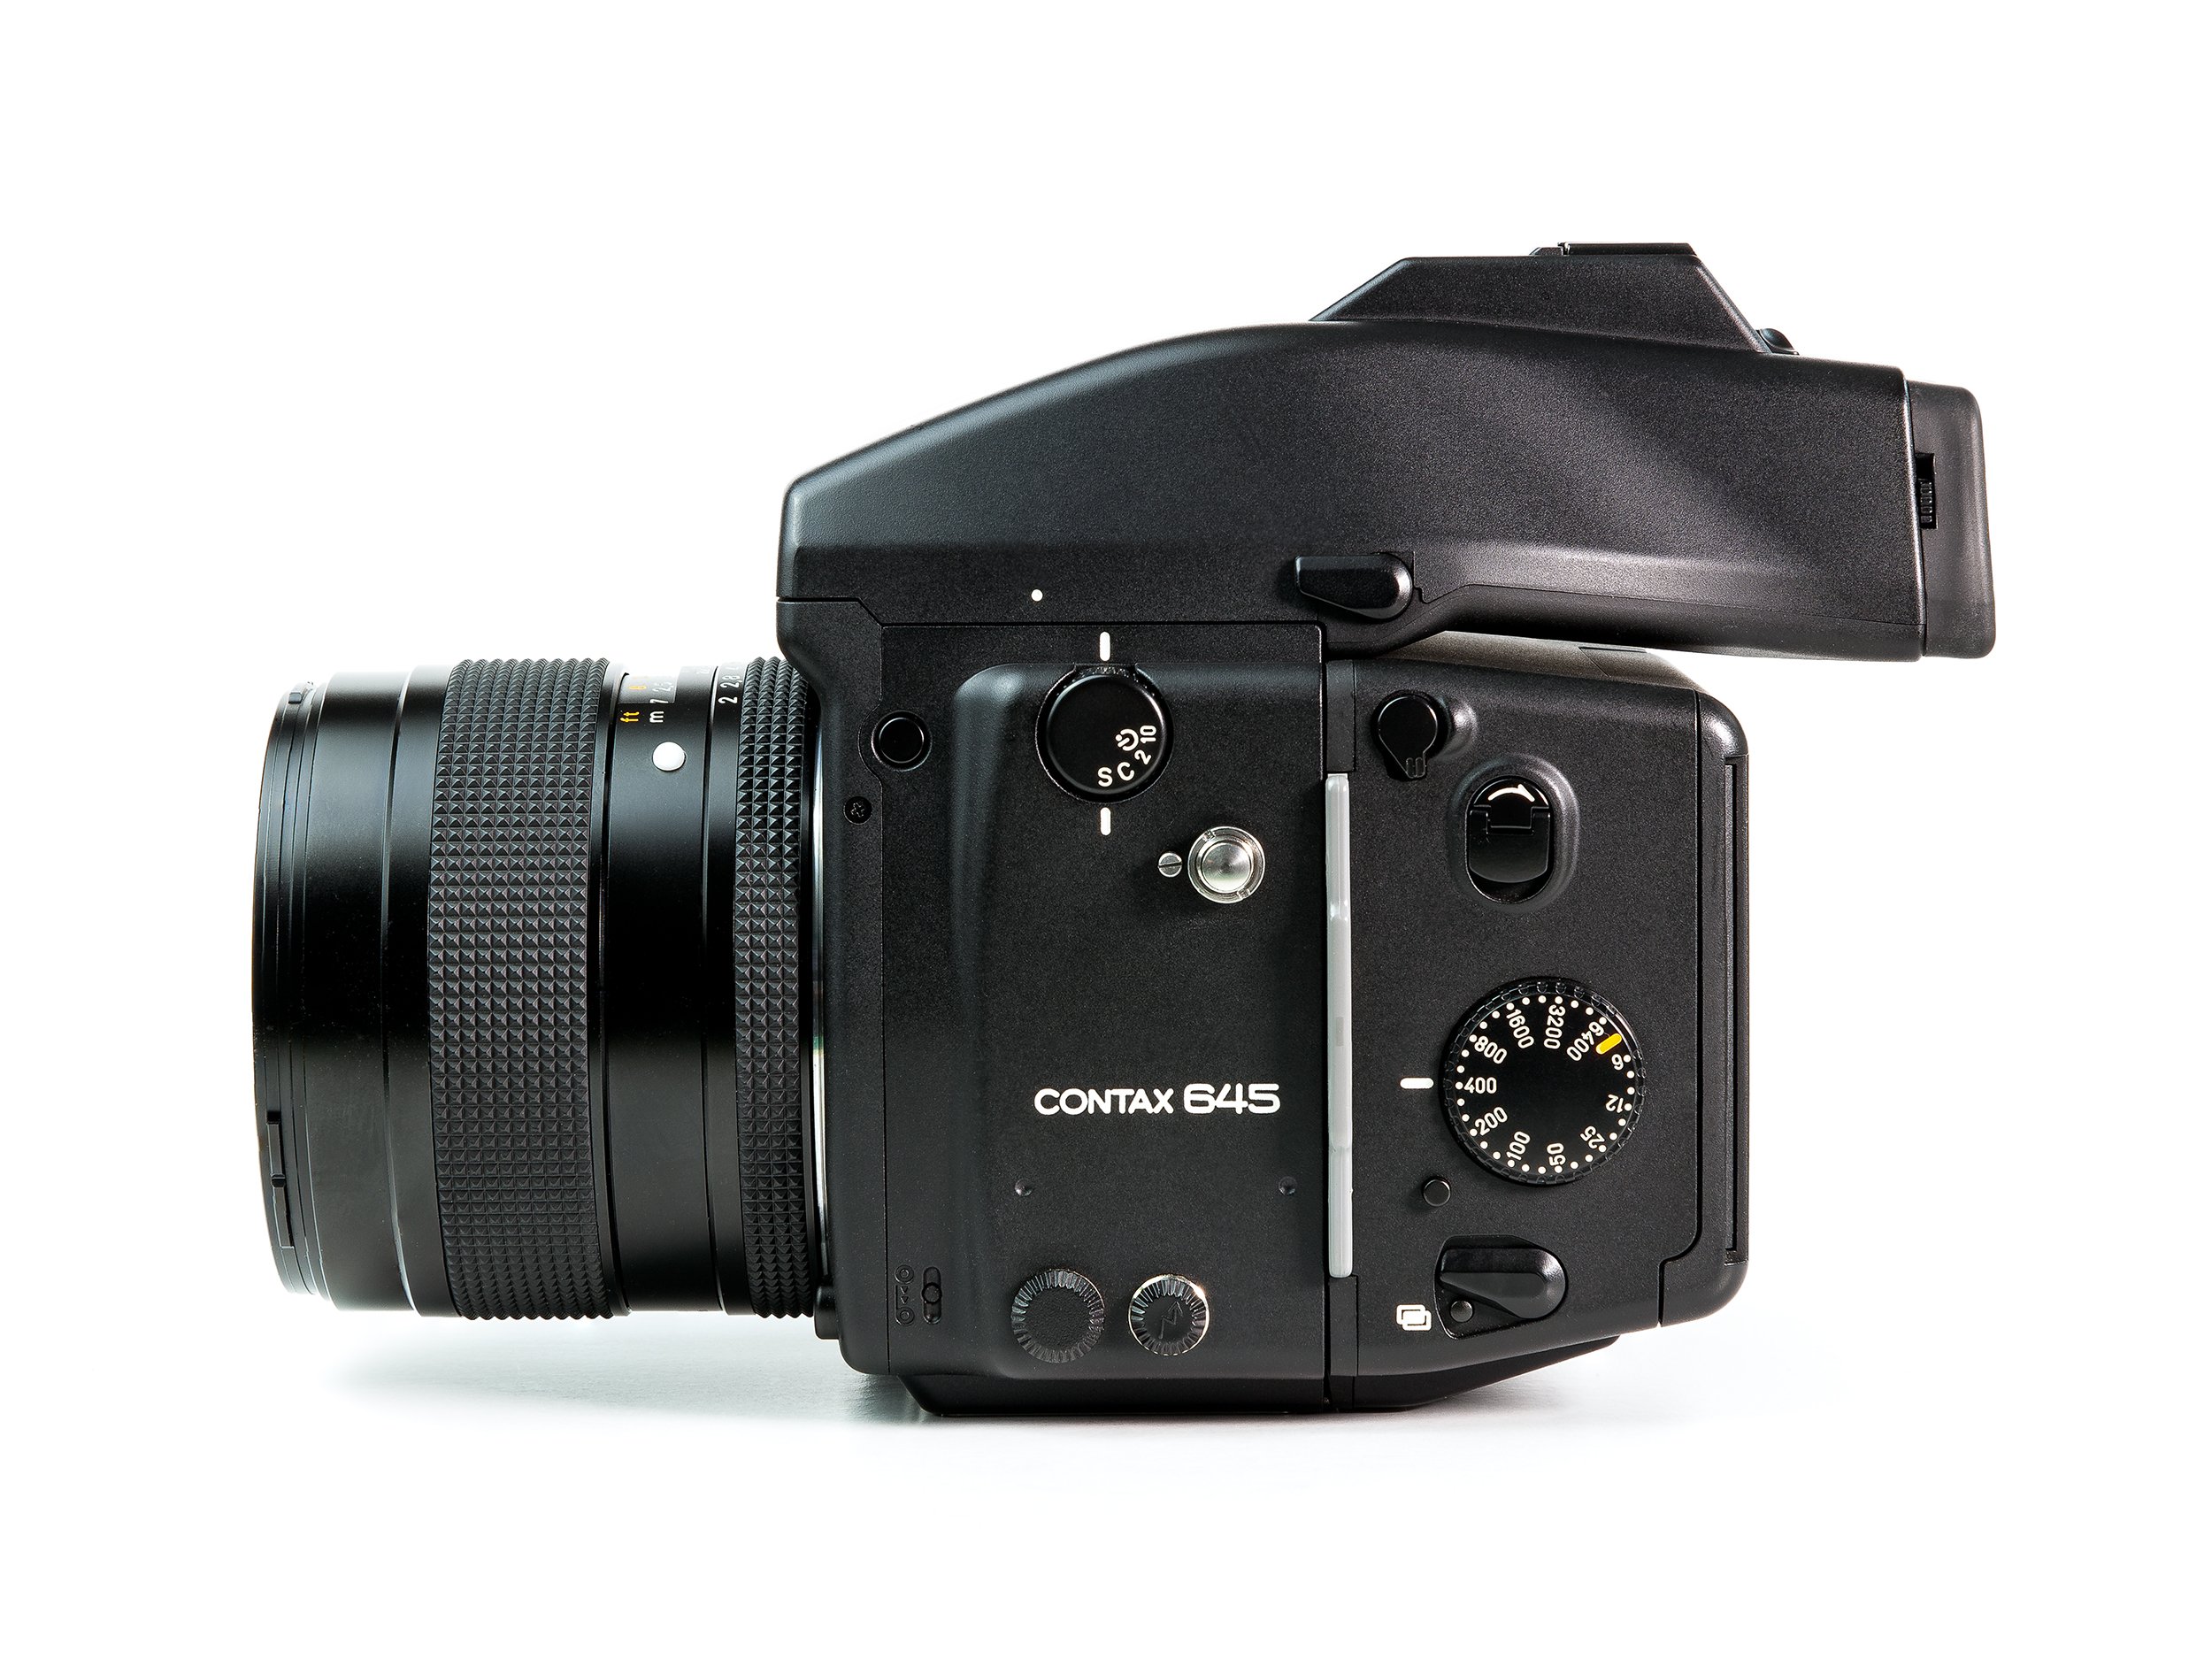 hobby Bermad fe Review of the CONTAX 645 — Invernodreaming